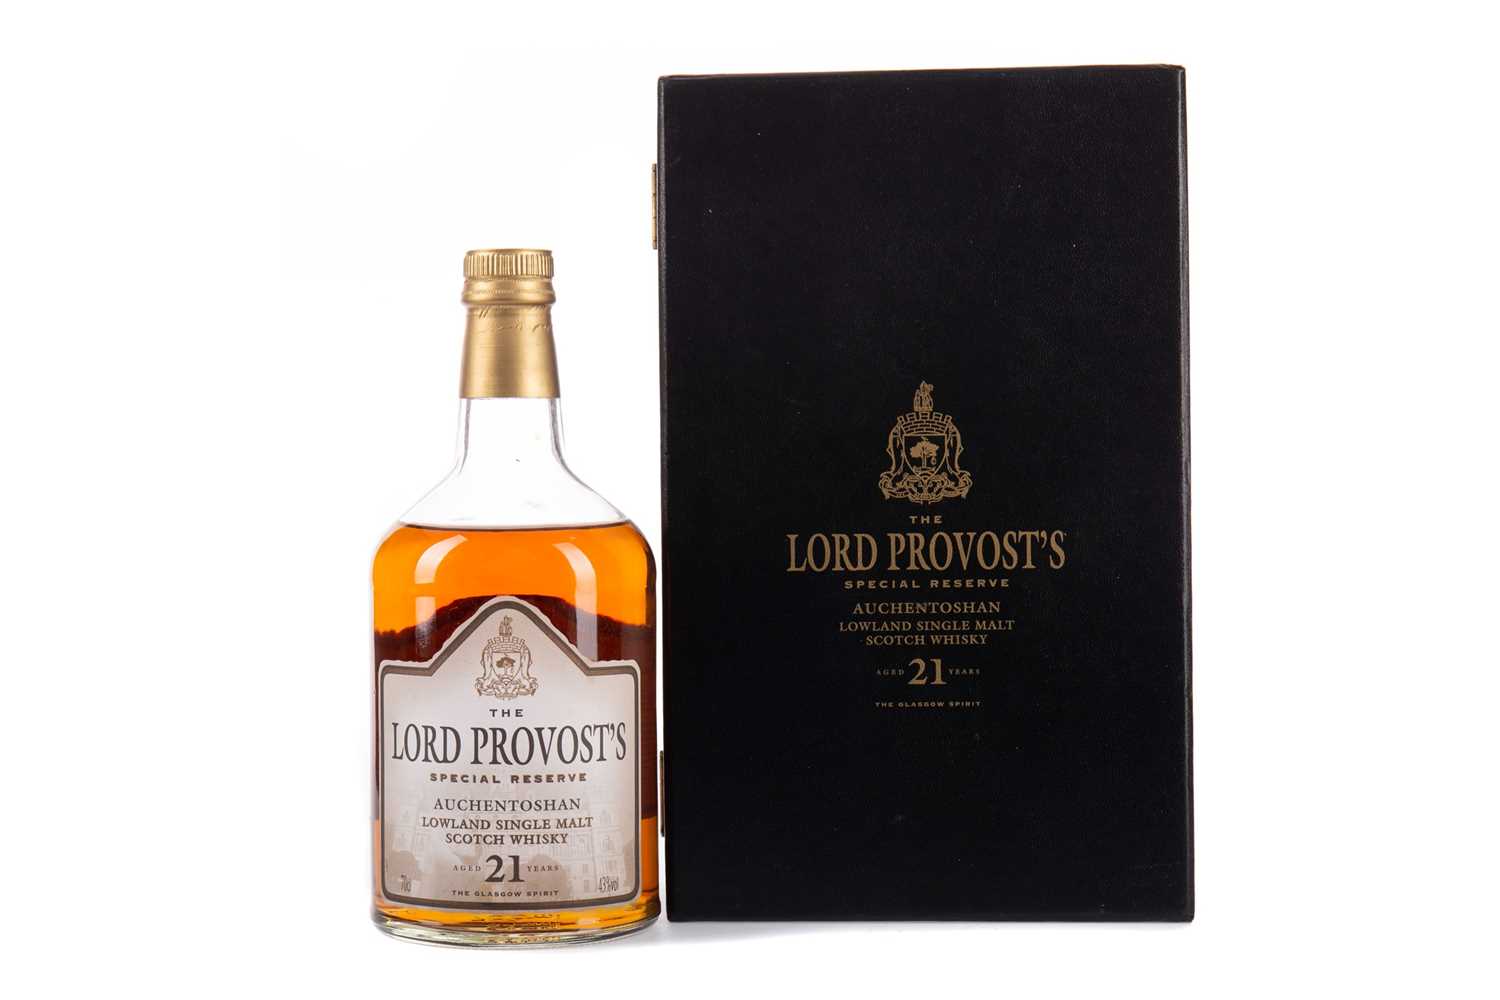 Lot 173 - AUCHENTOSHAN LORD PROVOST'S SPECIAL RESERVE AGED 21 YEARS